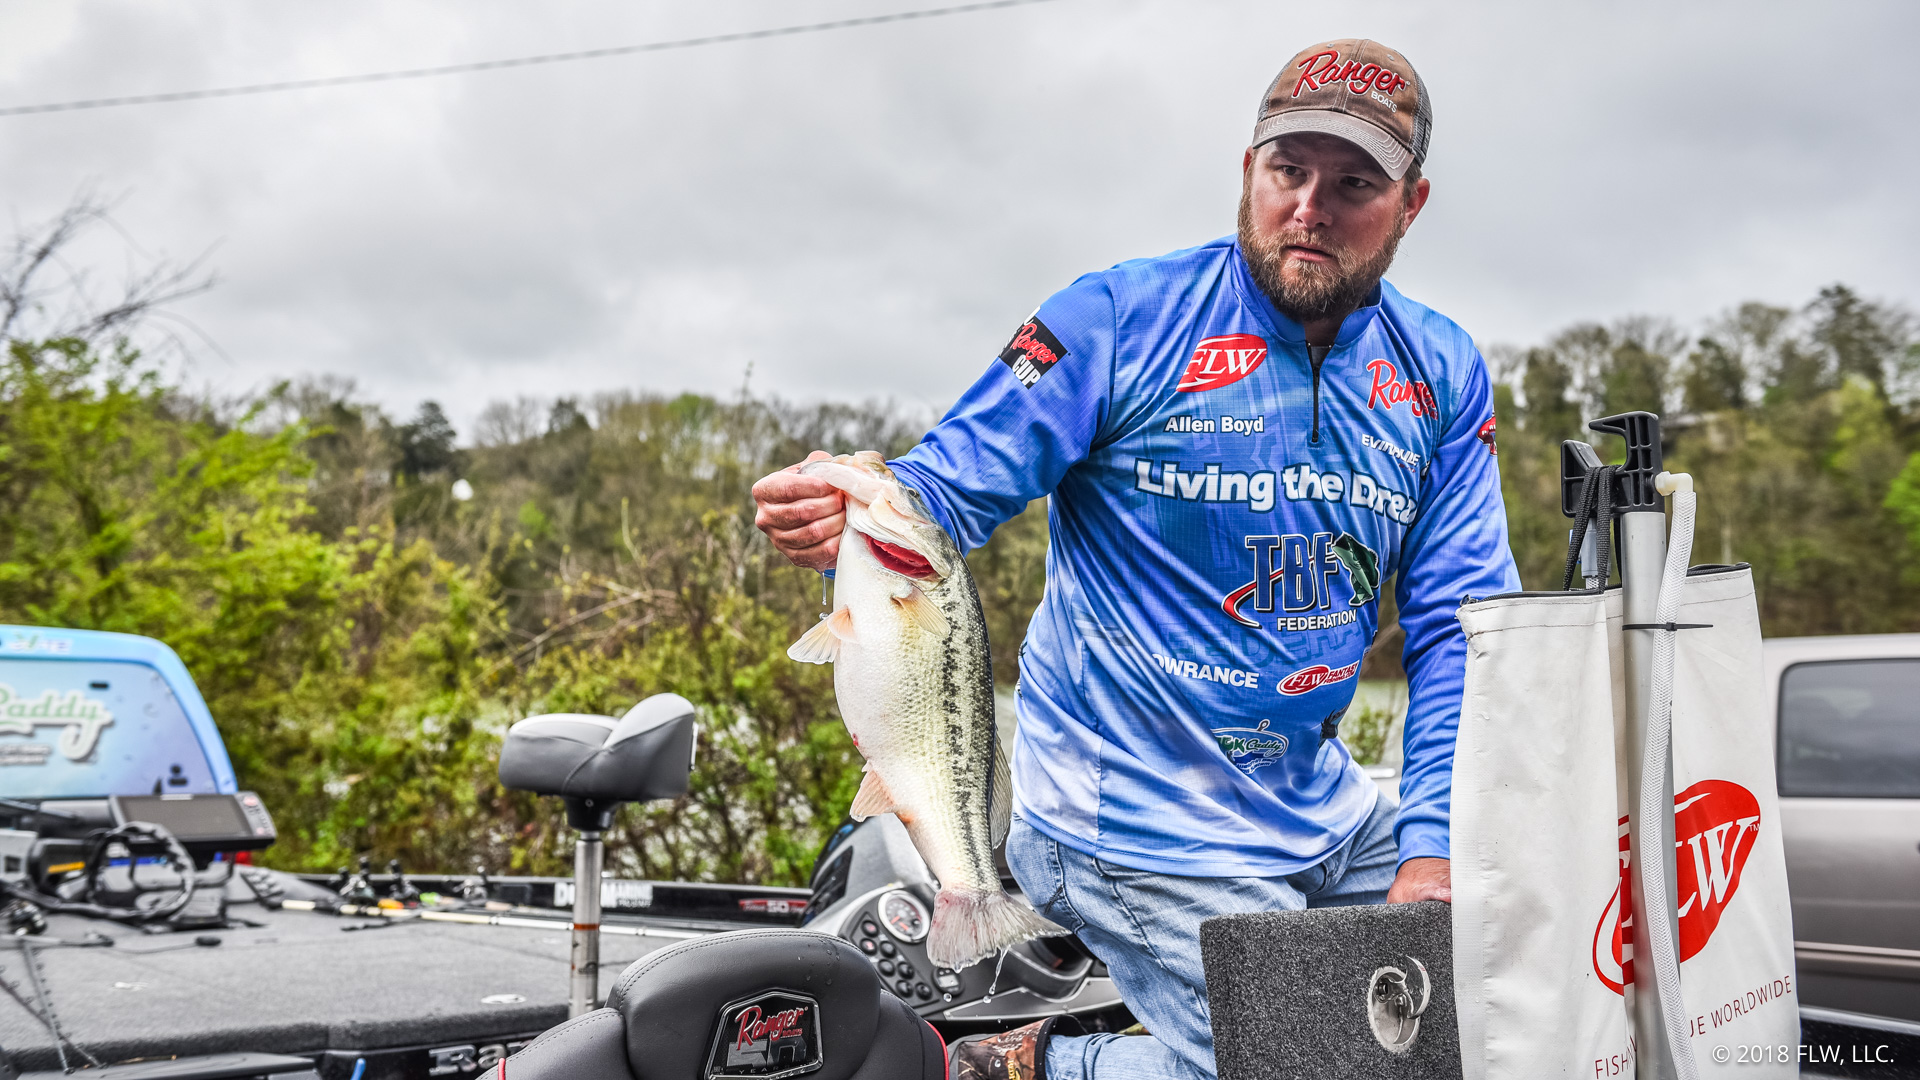 4 hacks to catch more bass on a swimjig like a pro. Use these tips to , fishing